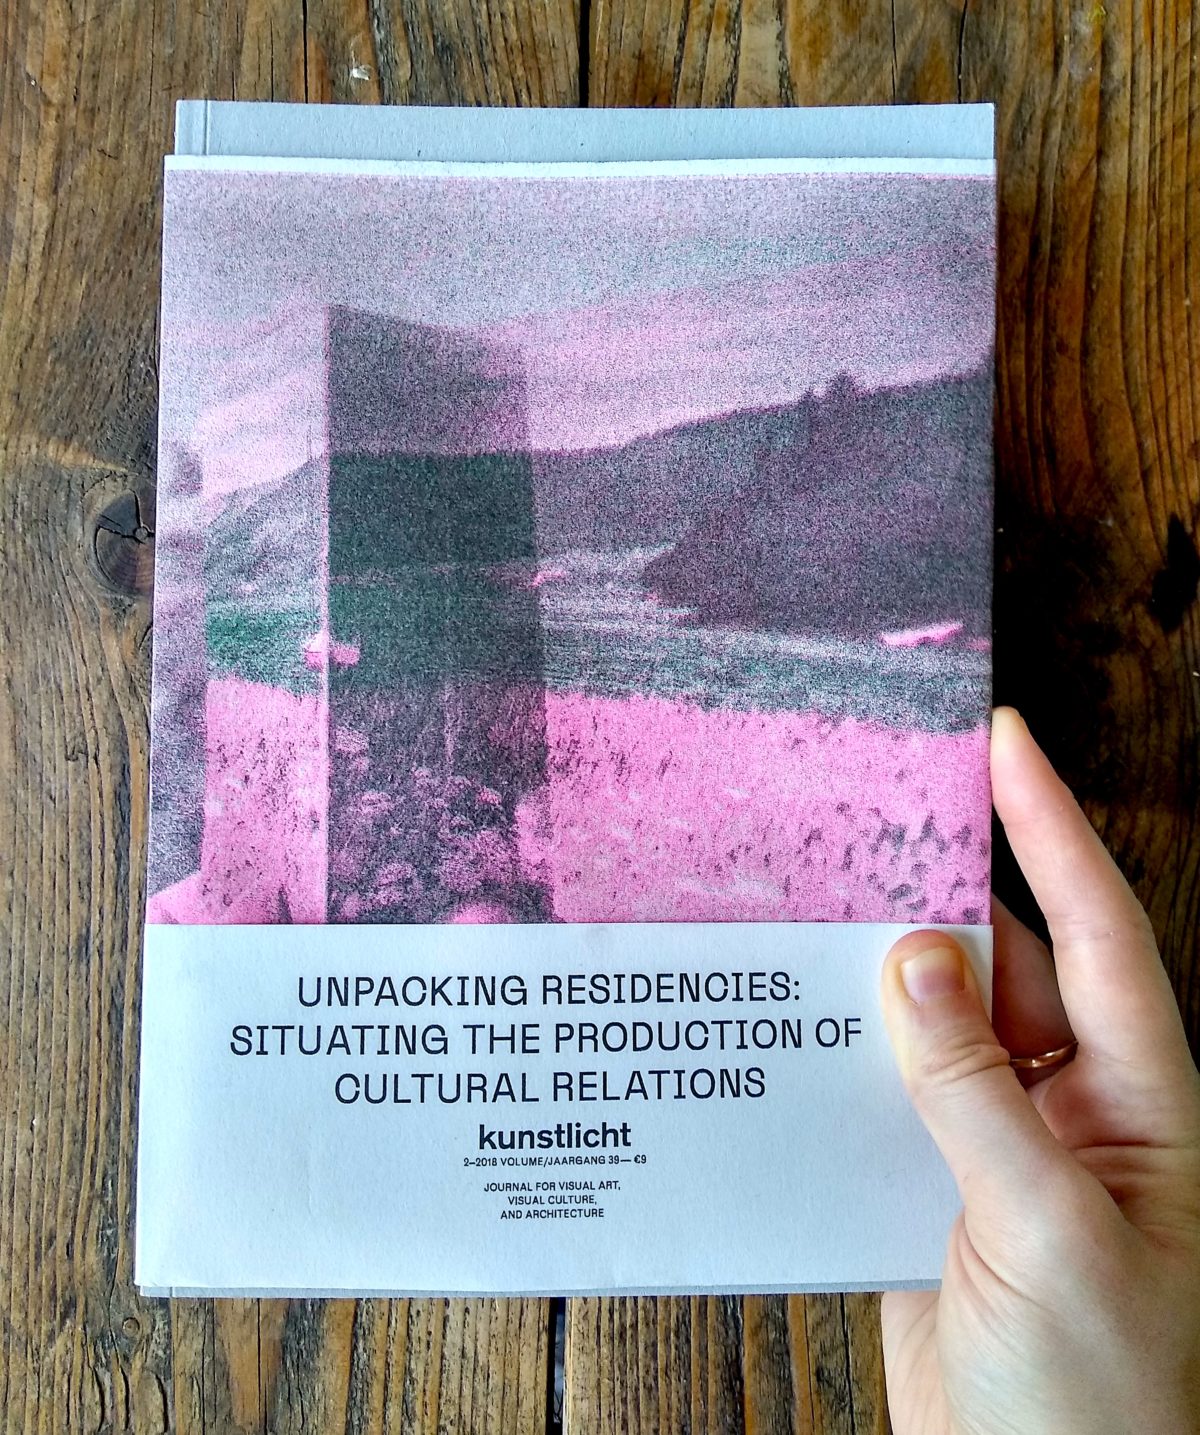 VOL. 39, NO 2, 2018, UNPACKING RESIDENCIES: SITUATING THE PRODUCTION OF CULTURAL RELATIONS